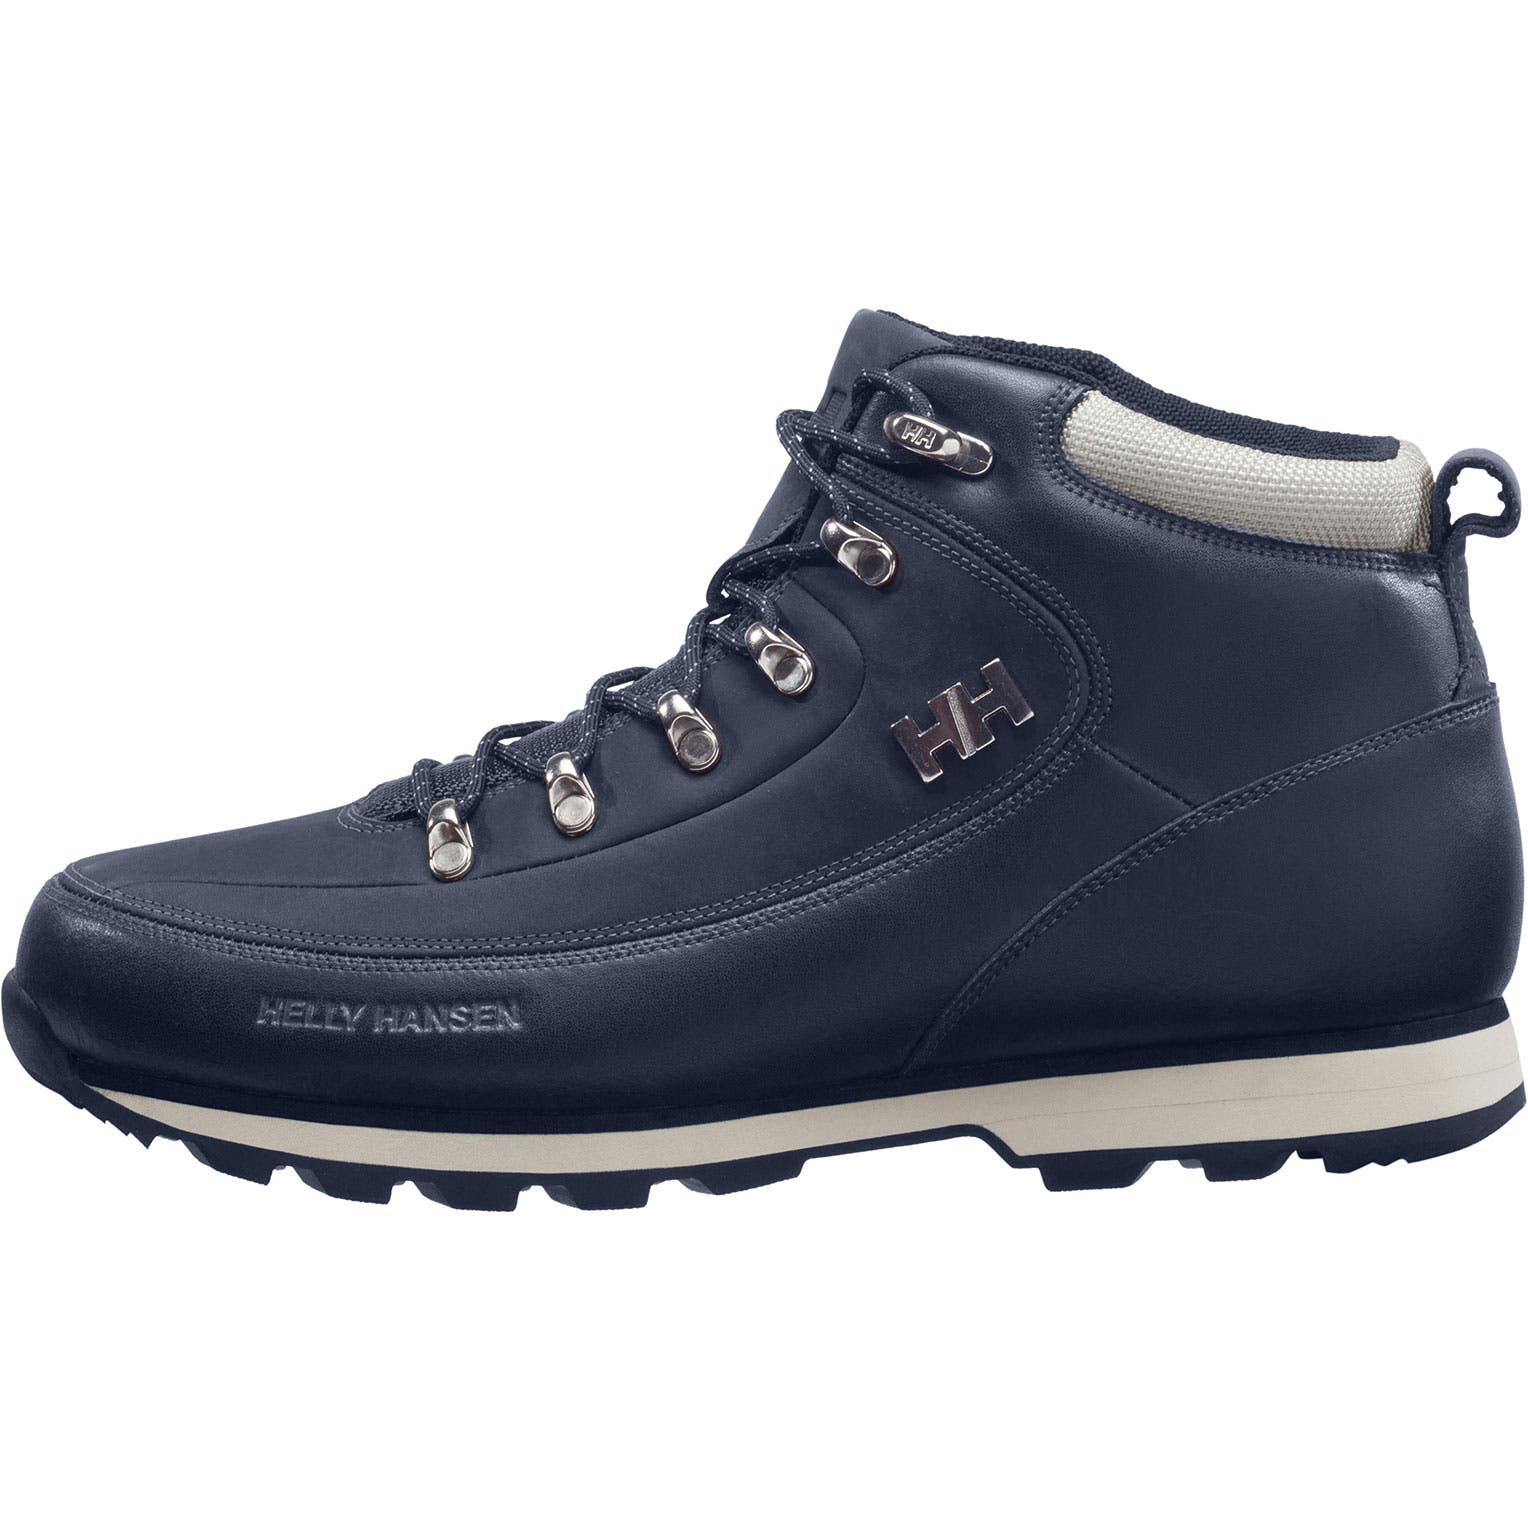 Helly Hansen Men's The Forester Winter Boot in Navy-Vaporous Grey-Gum from the side